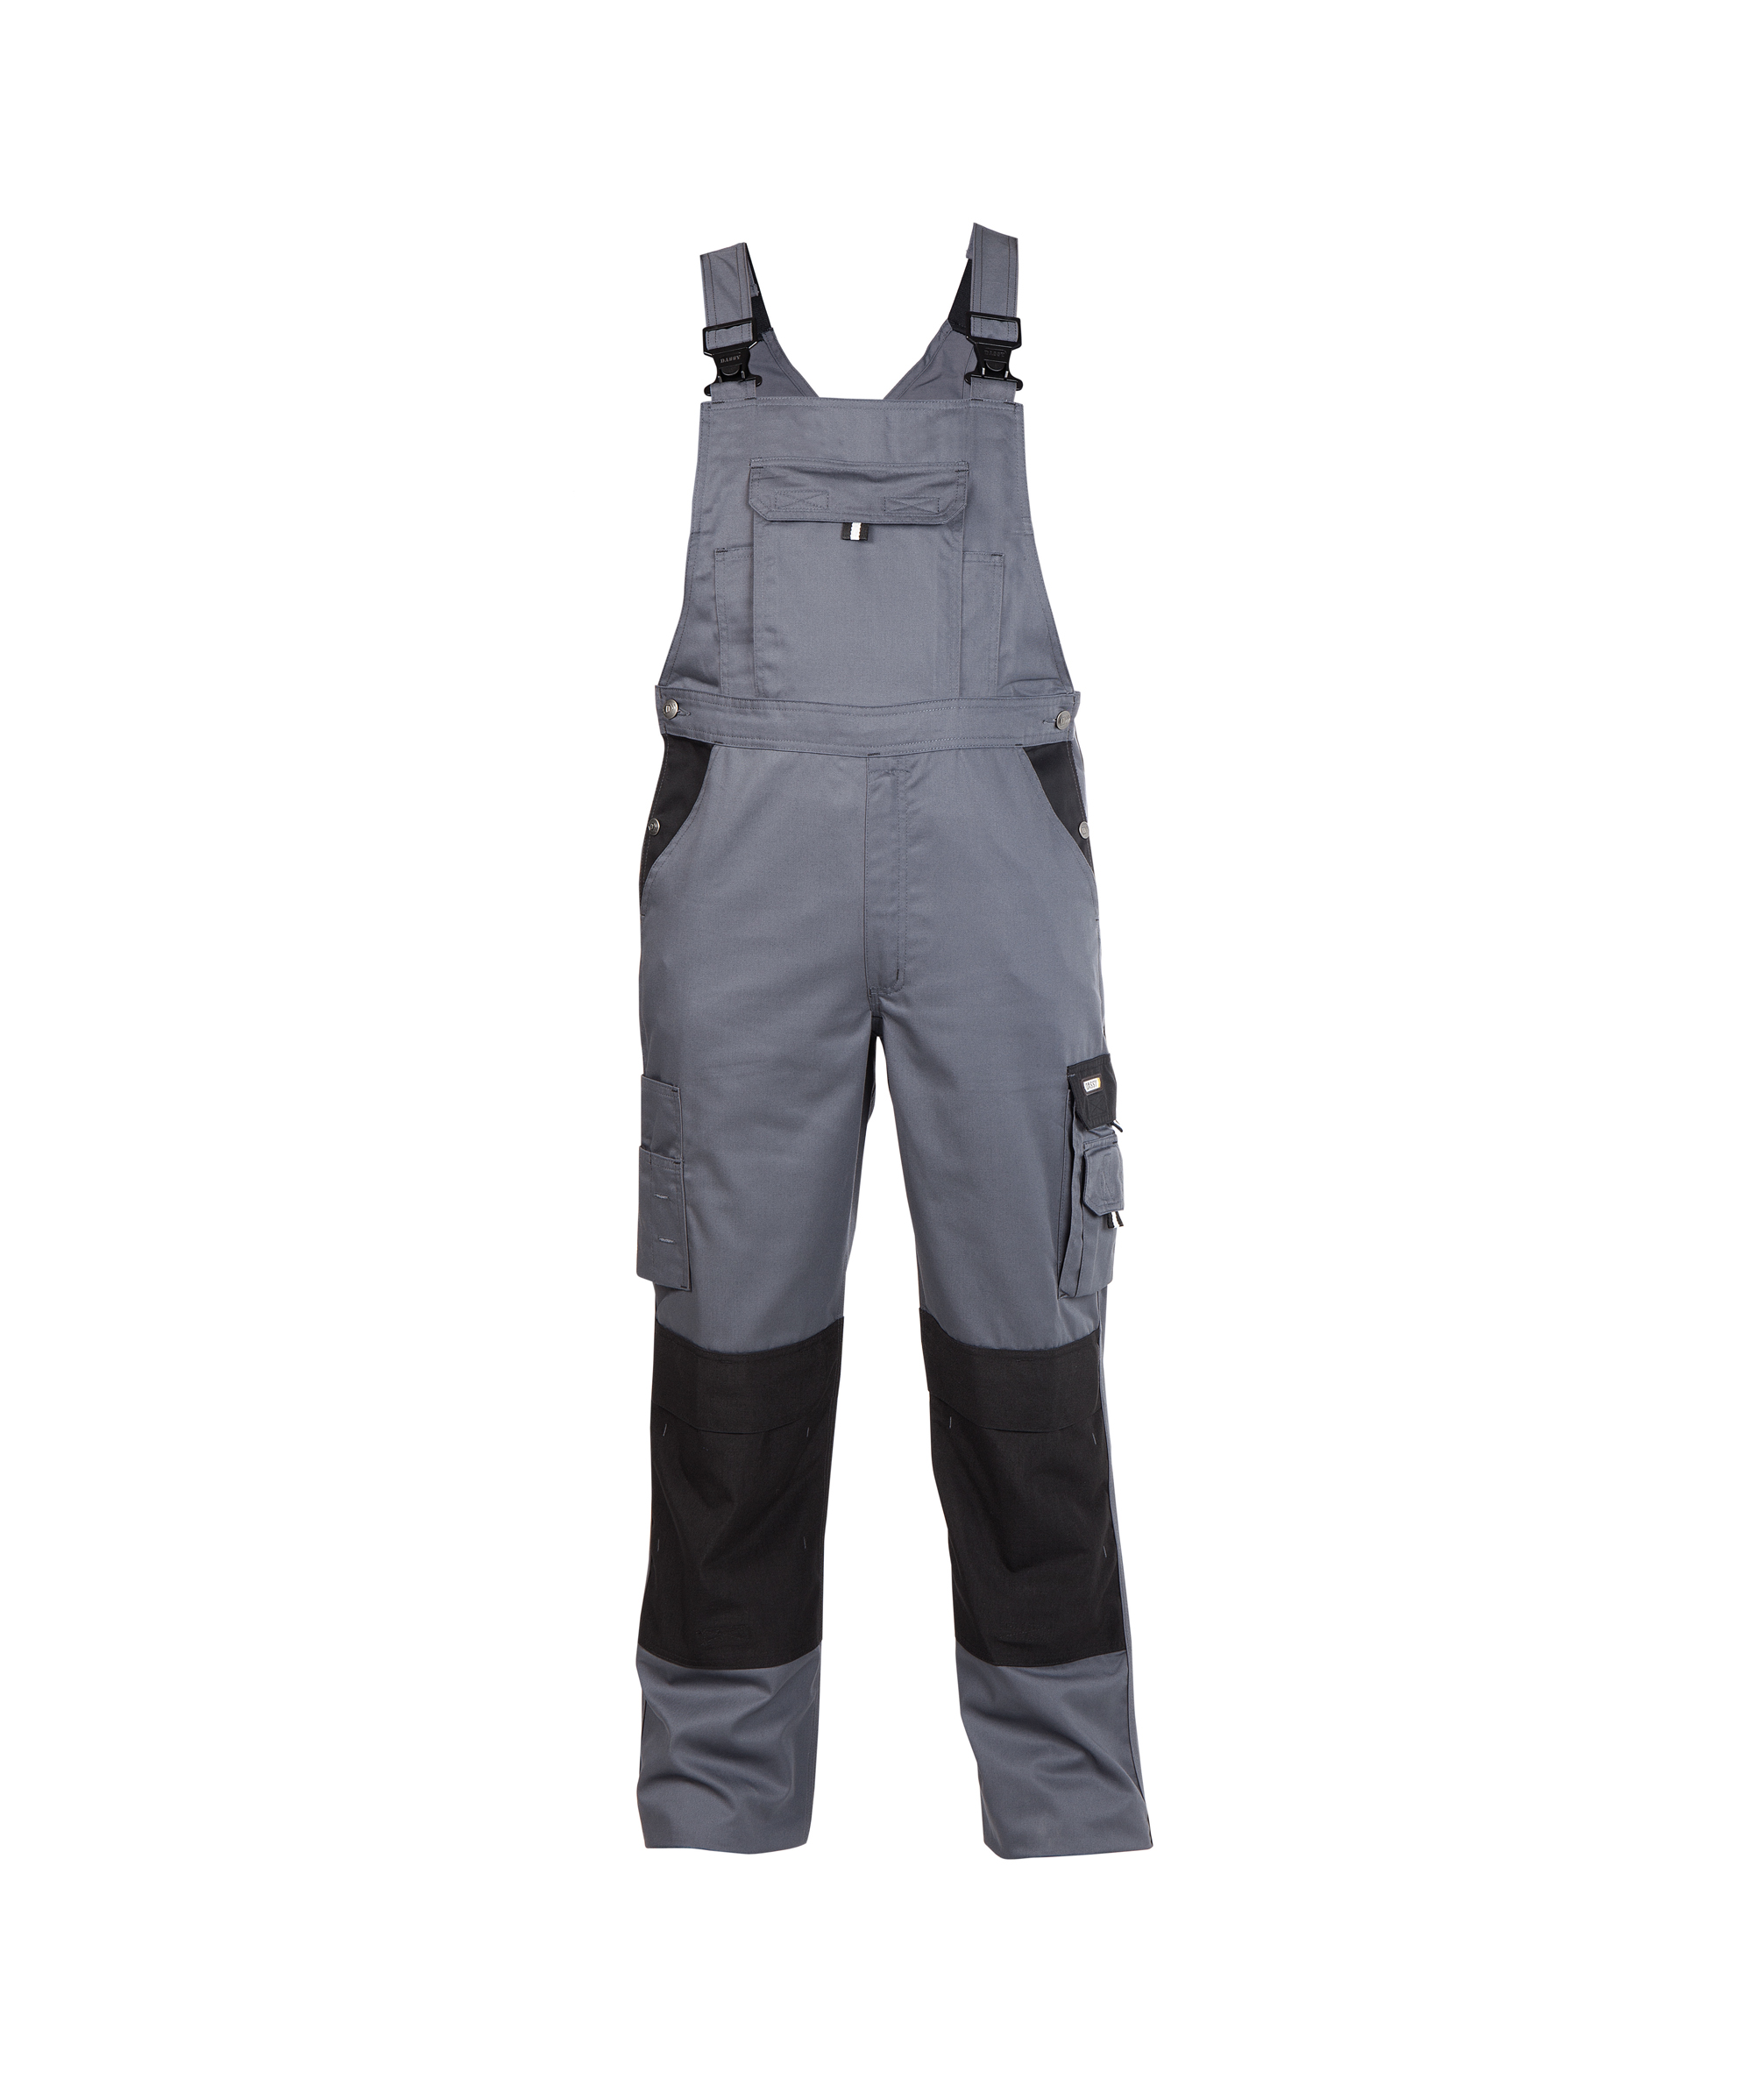 versailles_two-tone-brace-overall-with-knee-pockets_cement-grey-black_front.jpg